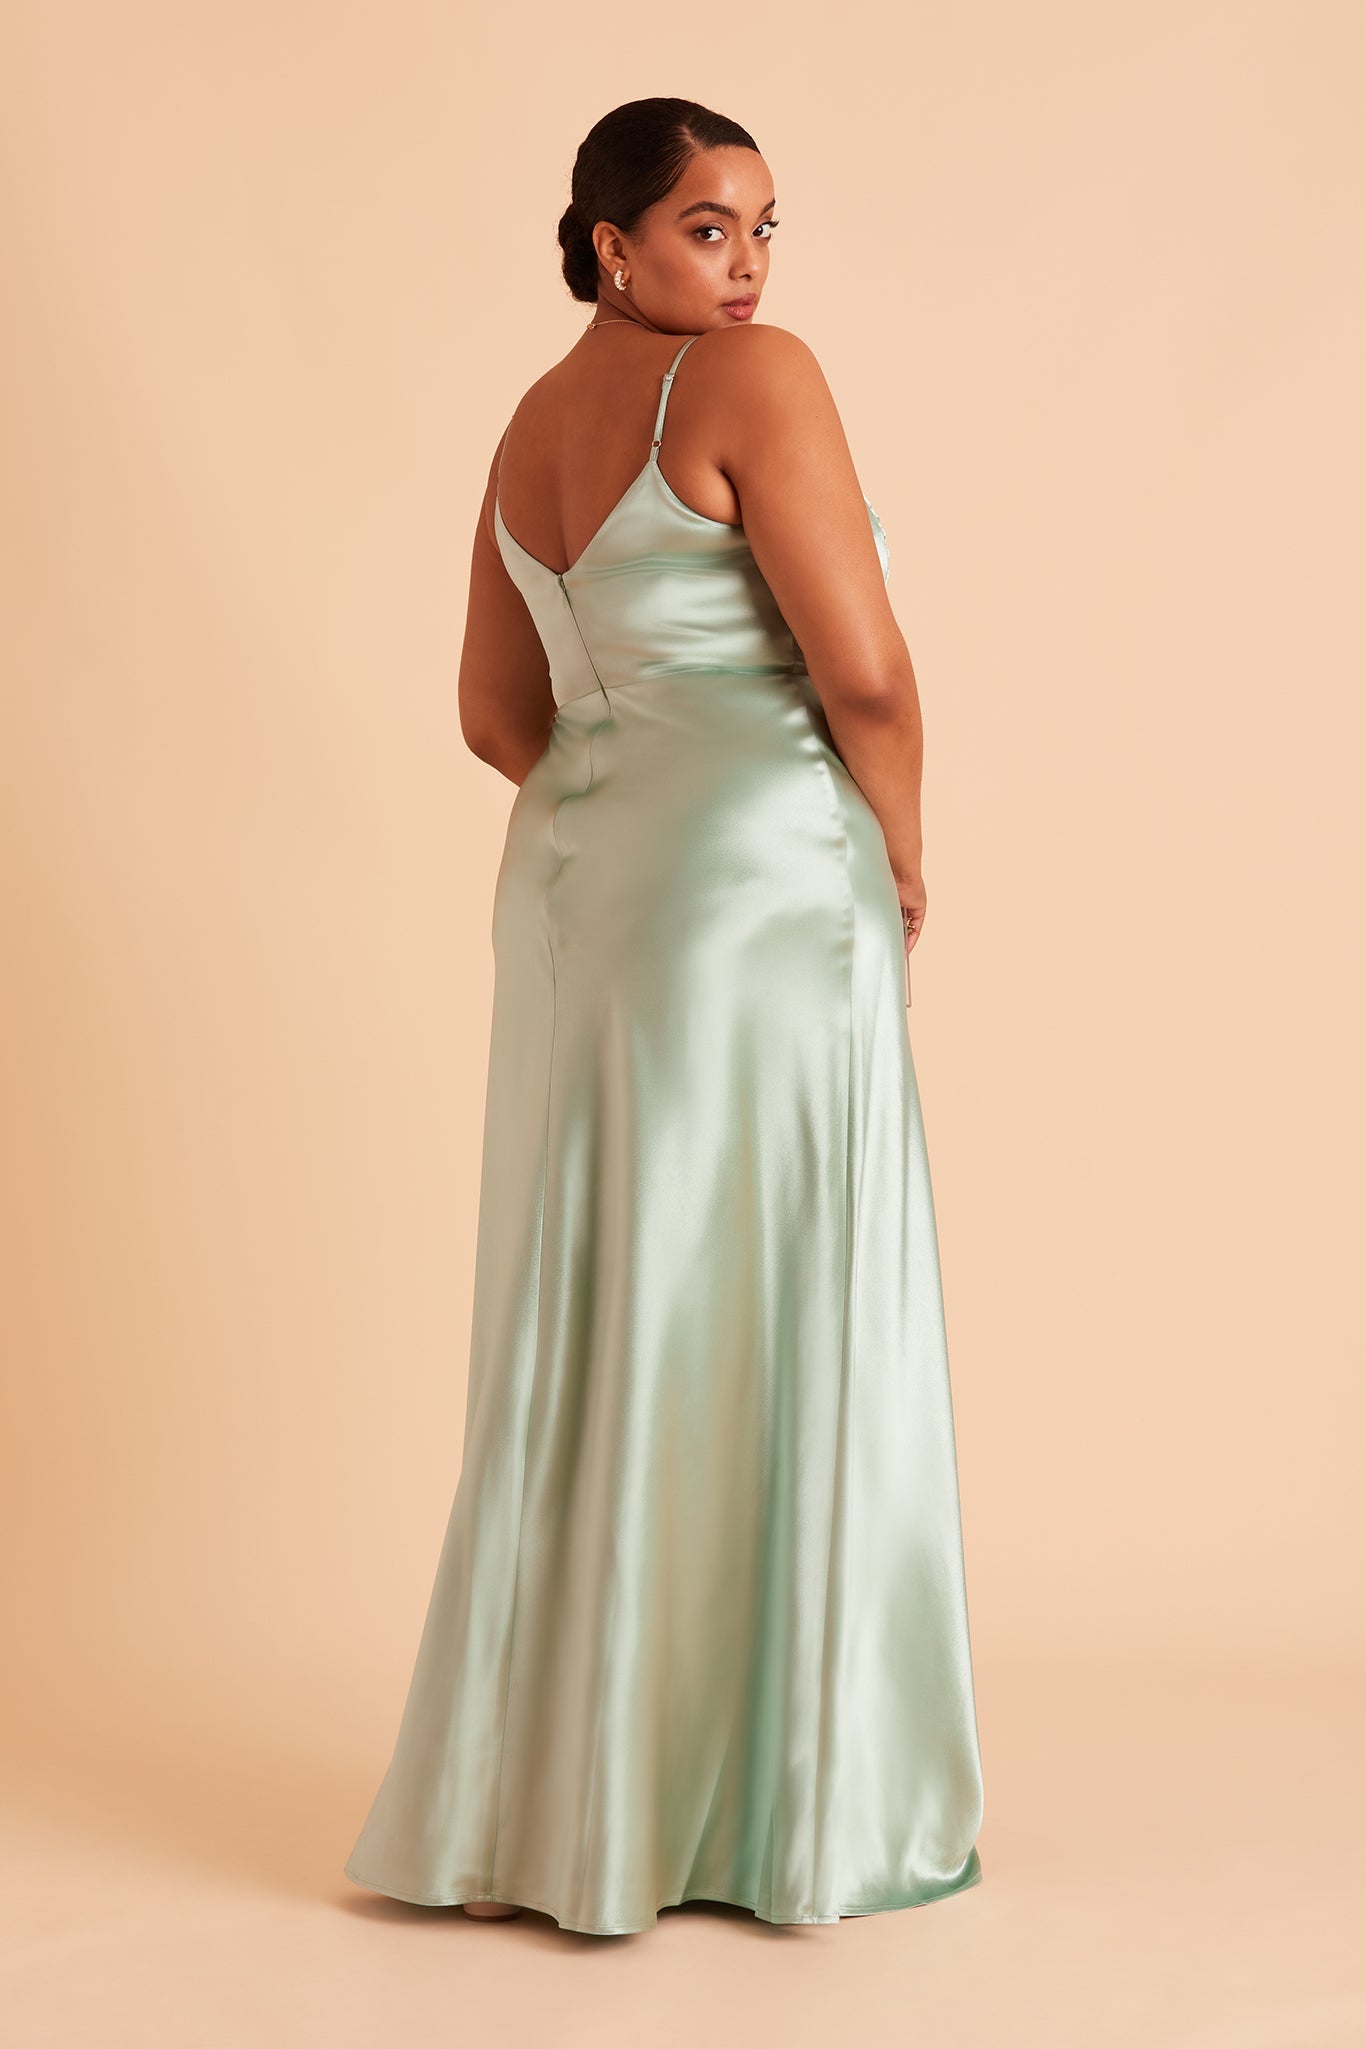 Jay plus size bridesmaid dress with slit in sage green satin by Birdy Grey, side view